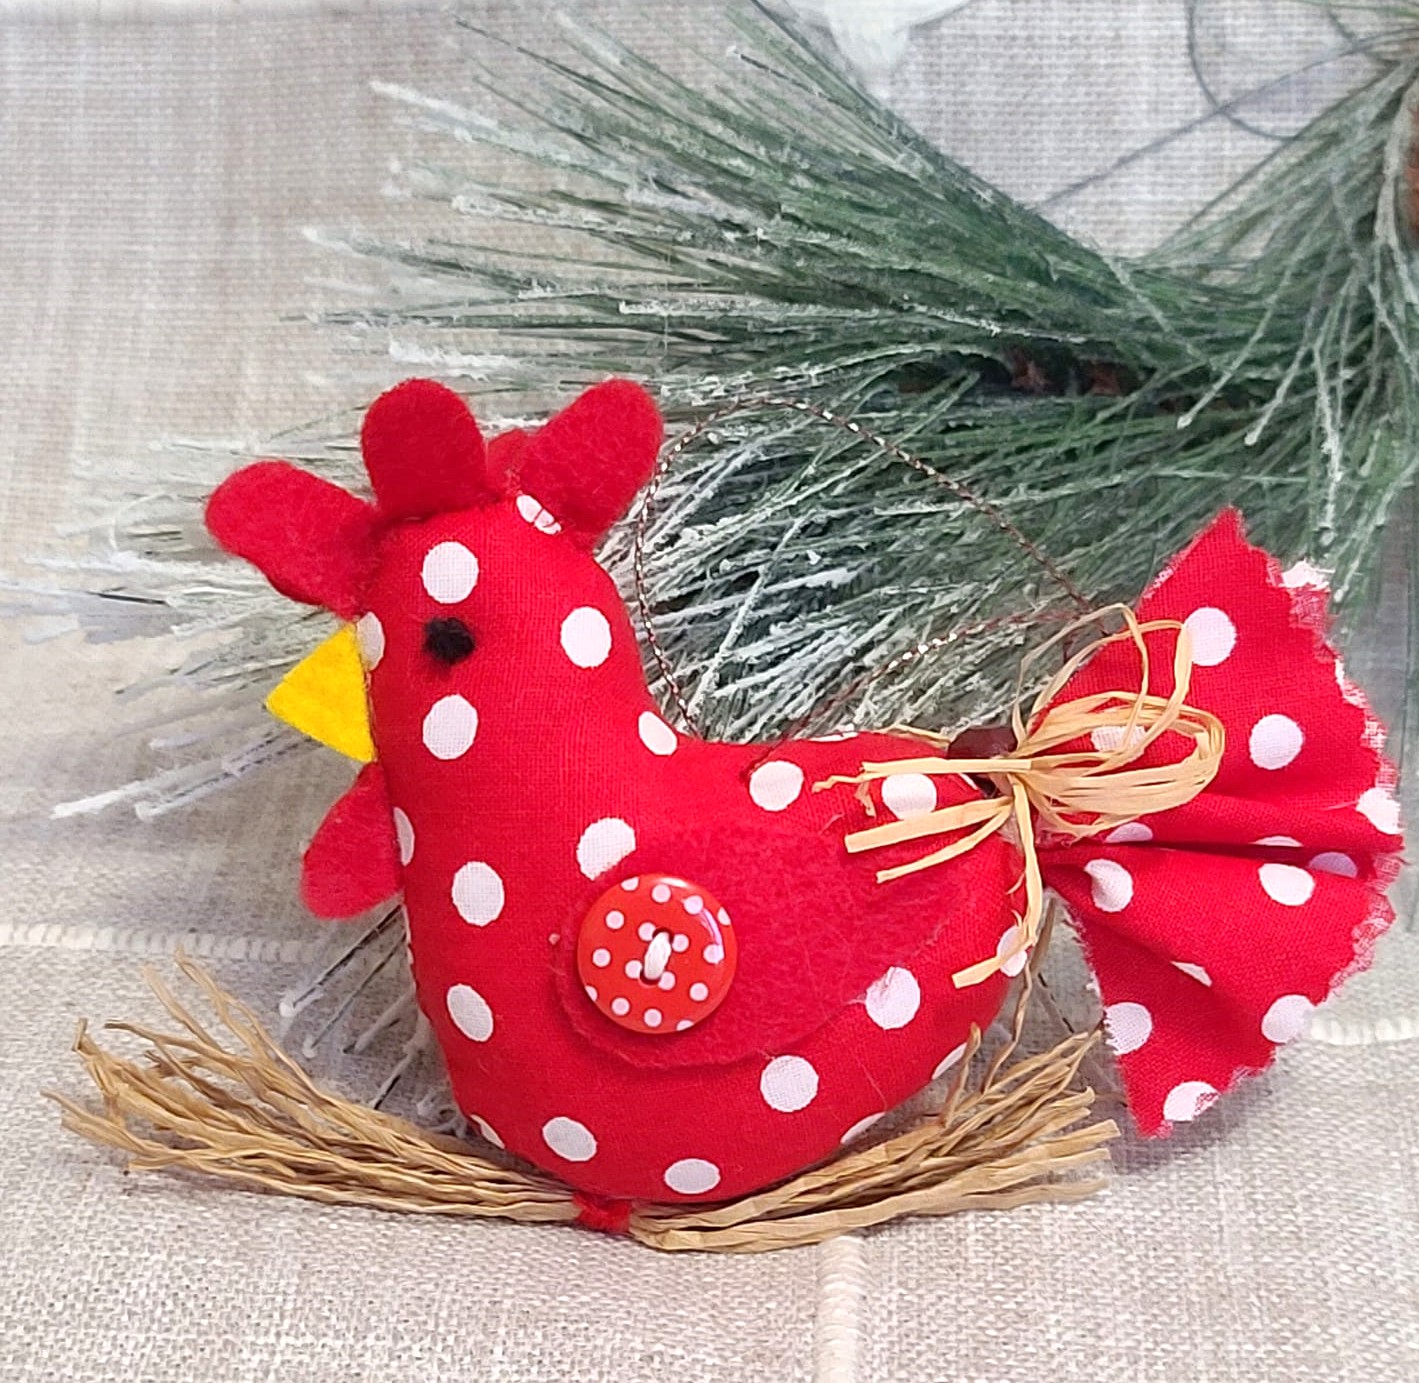 Country polka dot rooster ornament on straw branch -red & white